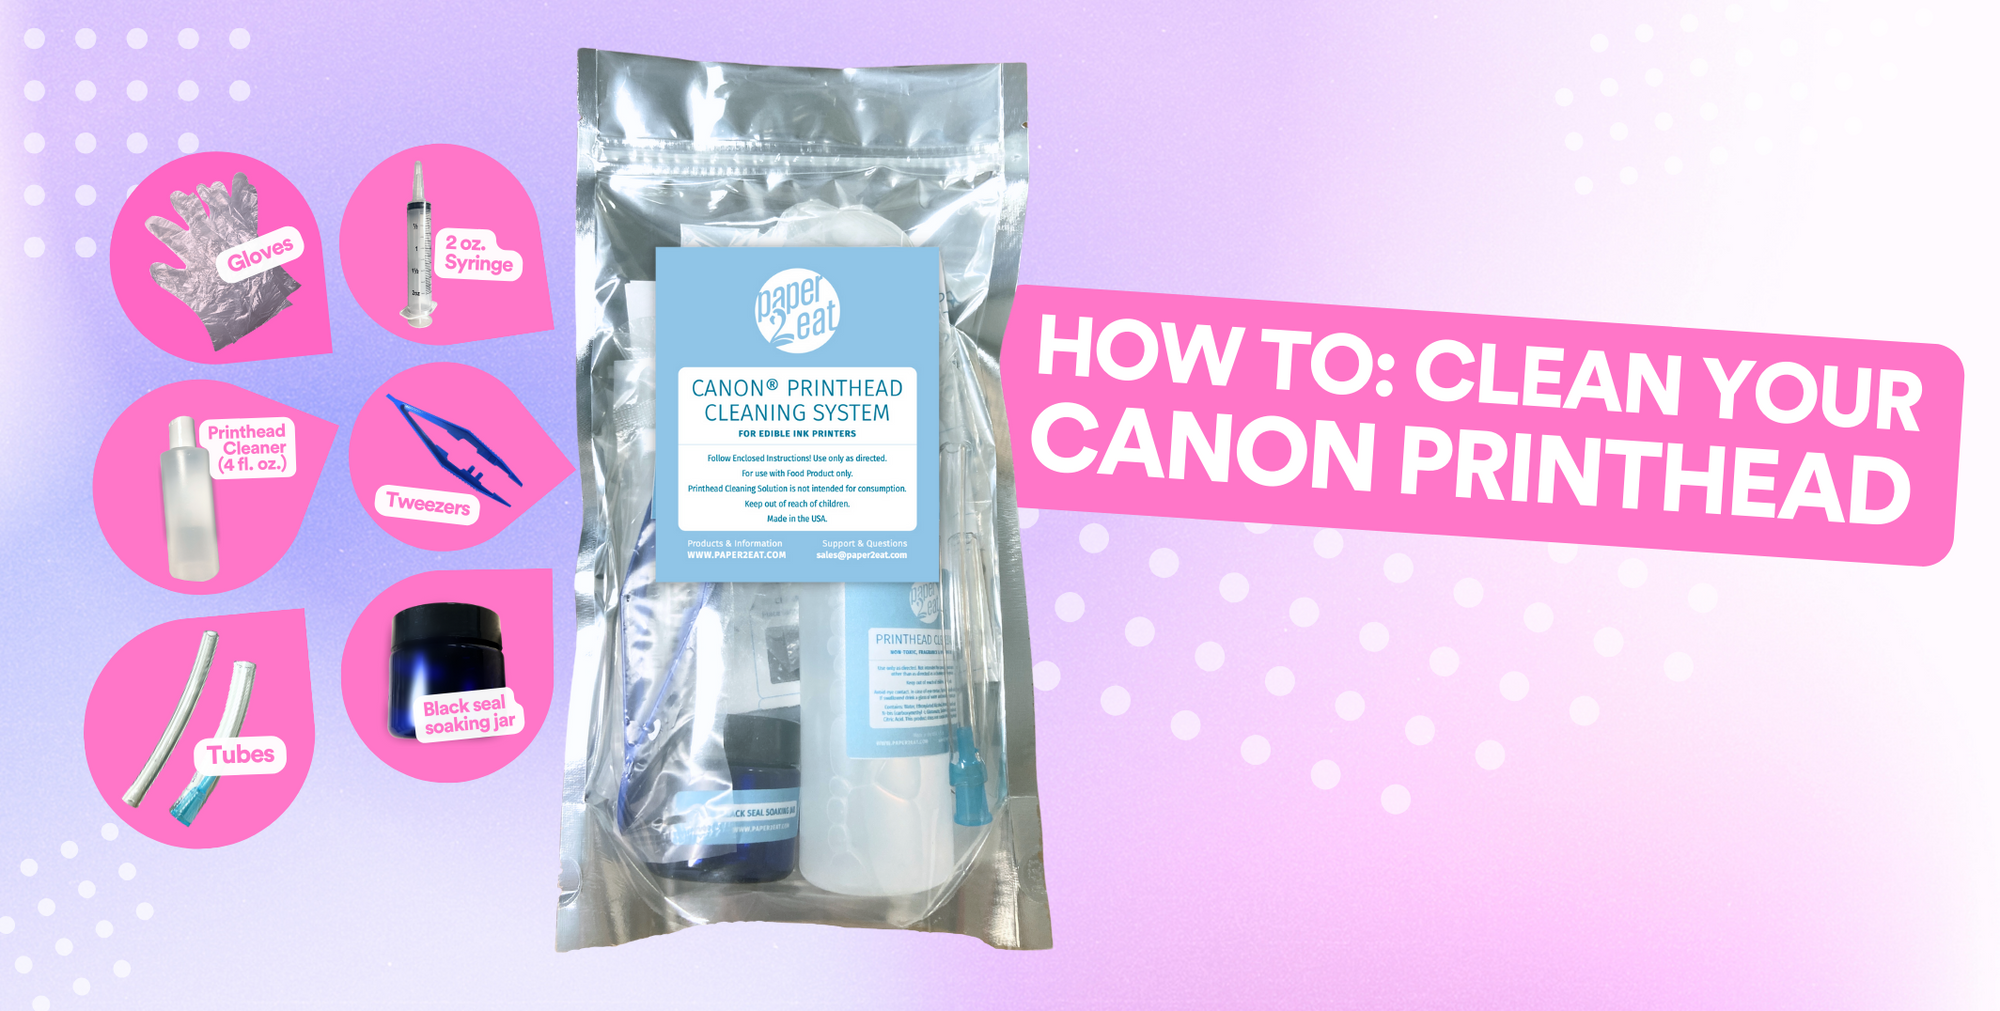 How To: Clean Your Canon Printhead Using the paper2eat Printhead Cleaning Kit